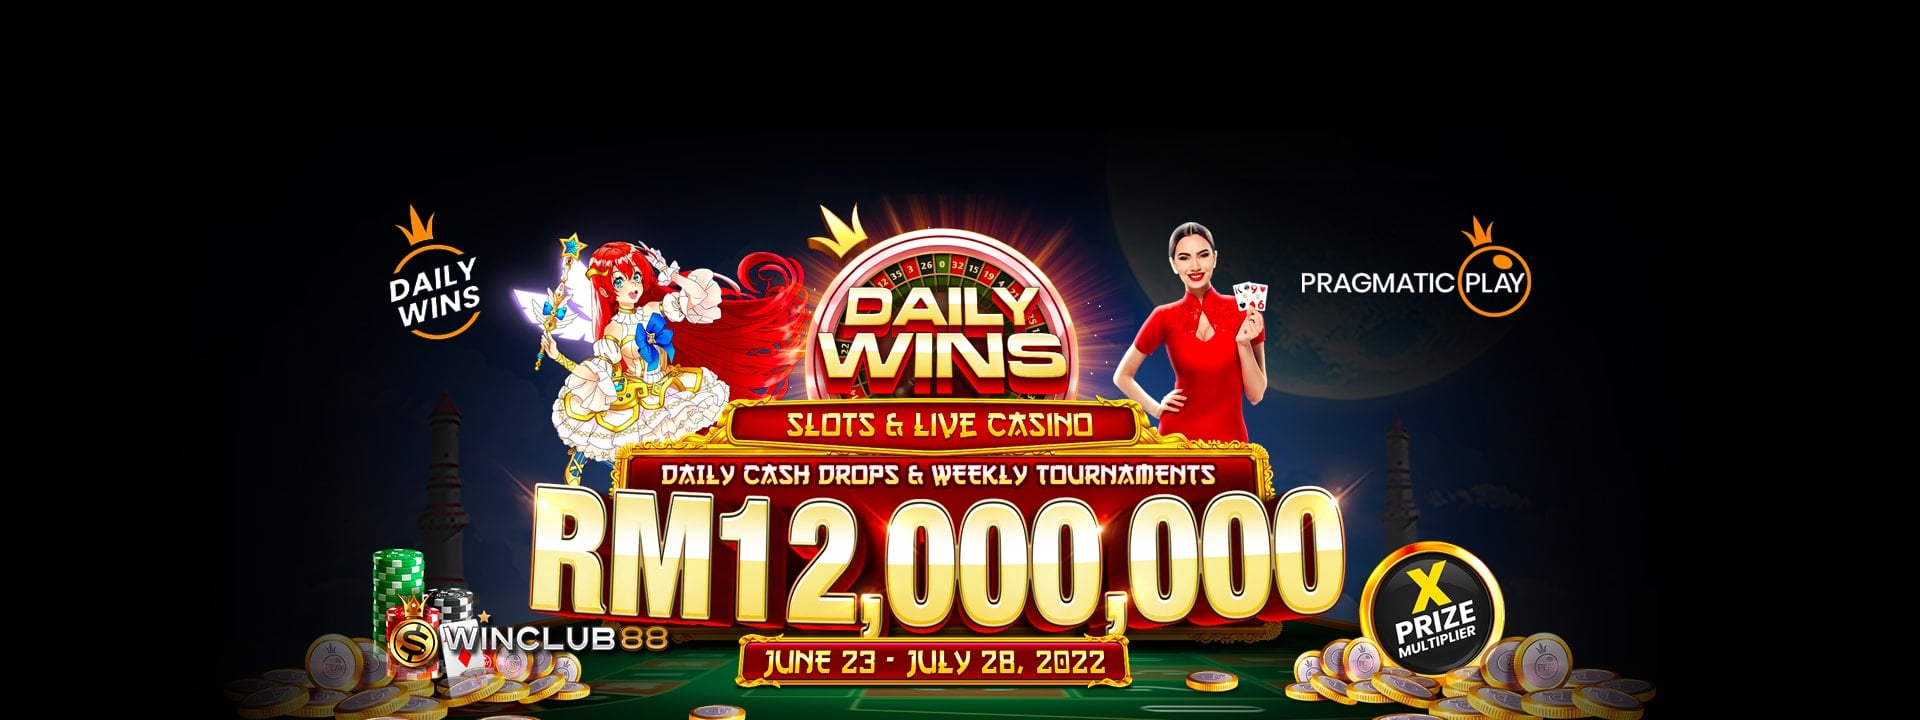 Games Slots Online Malaysia and Live Casino Malaysia Tournament 2022